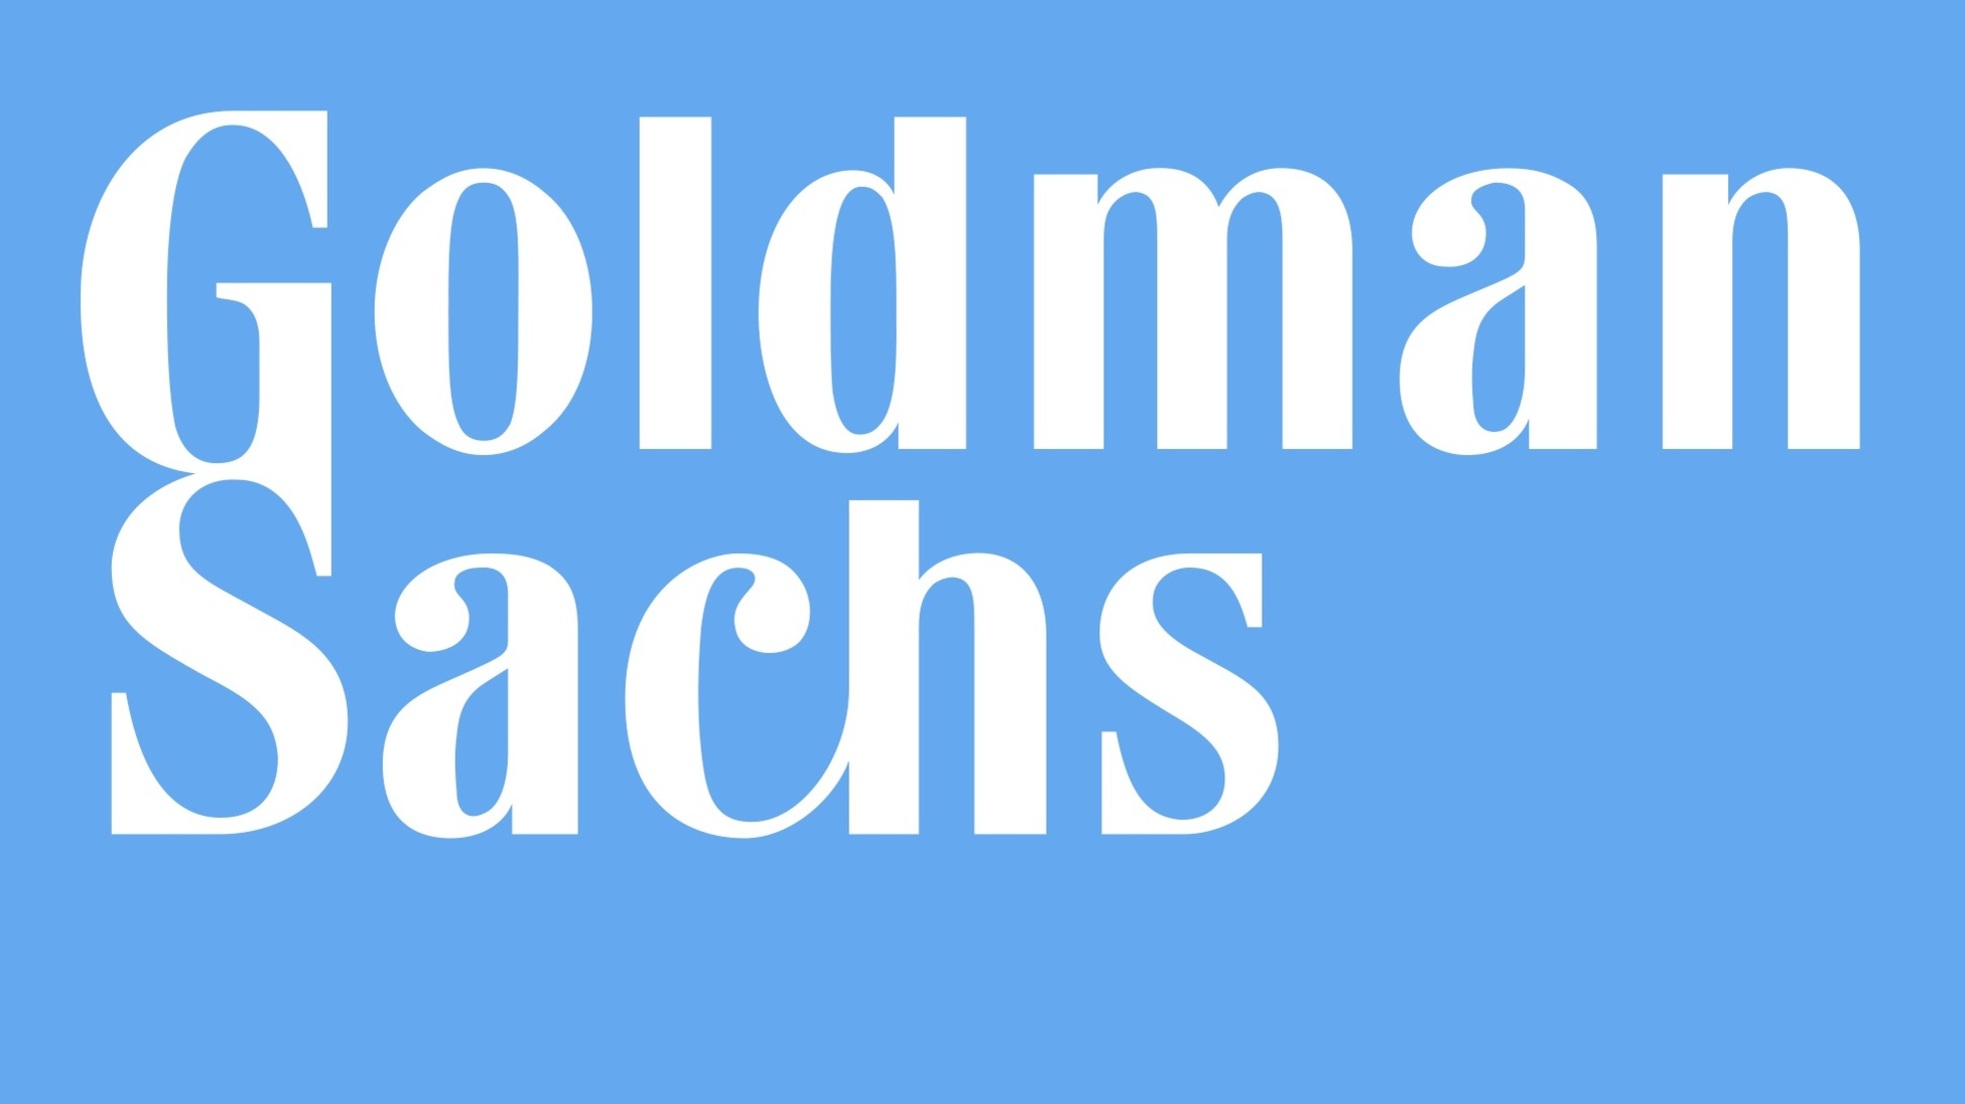 Goldman Sachs Bank Personal Loan - How to Apply